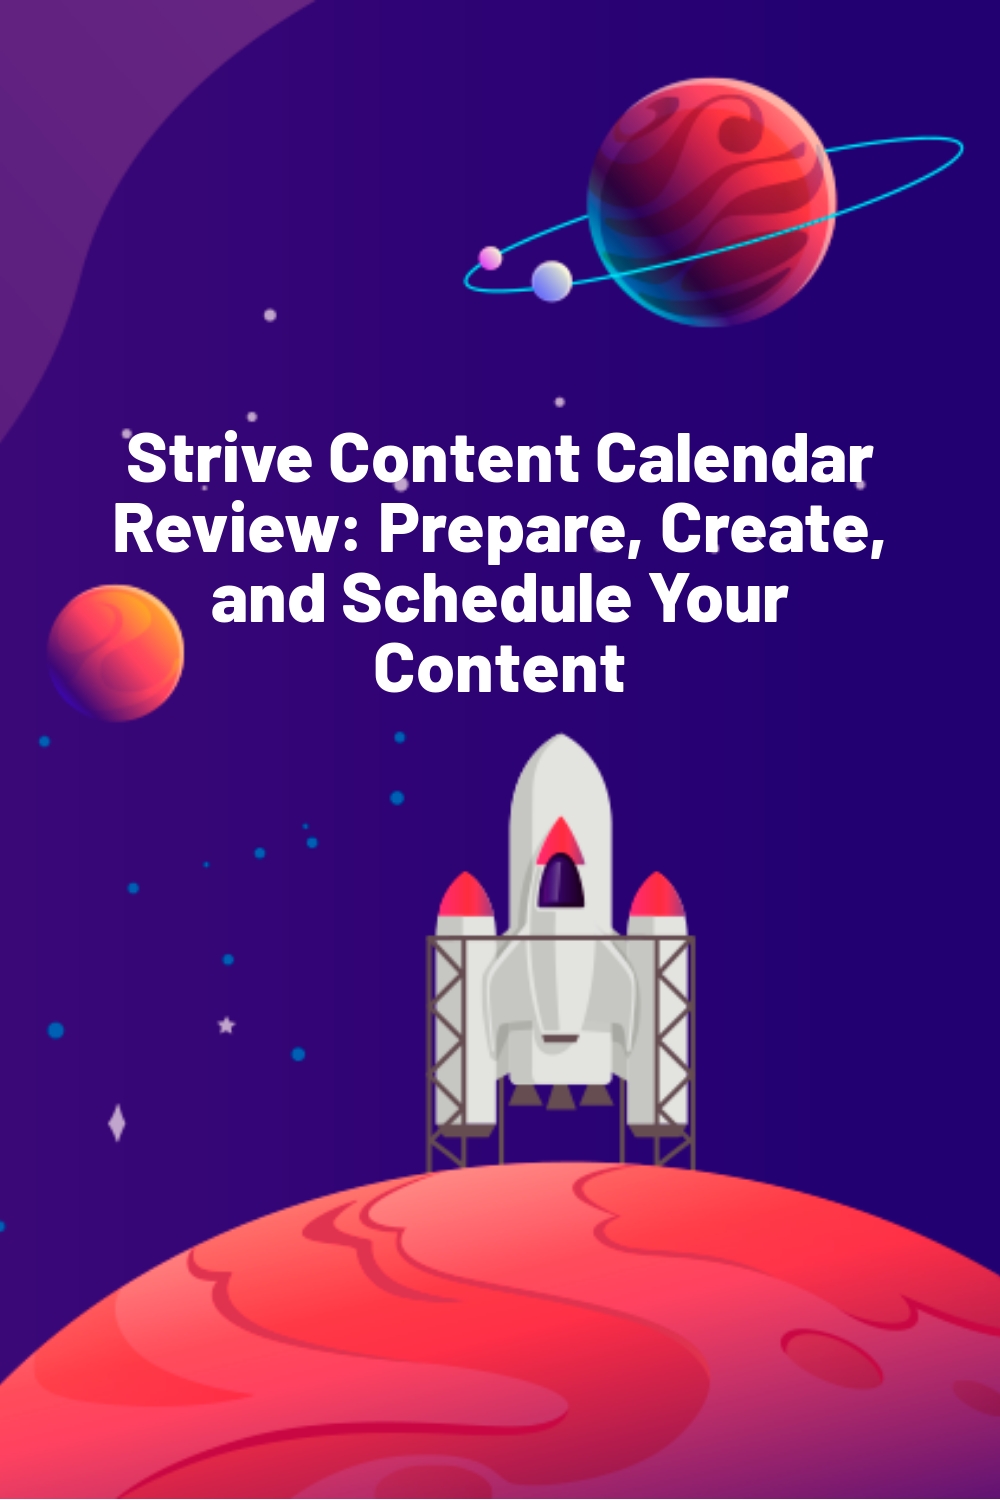 Strive Content Calendar Review: Prepare, Create, and Schedule Your Content